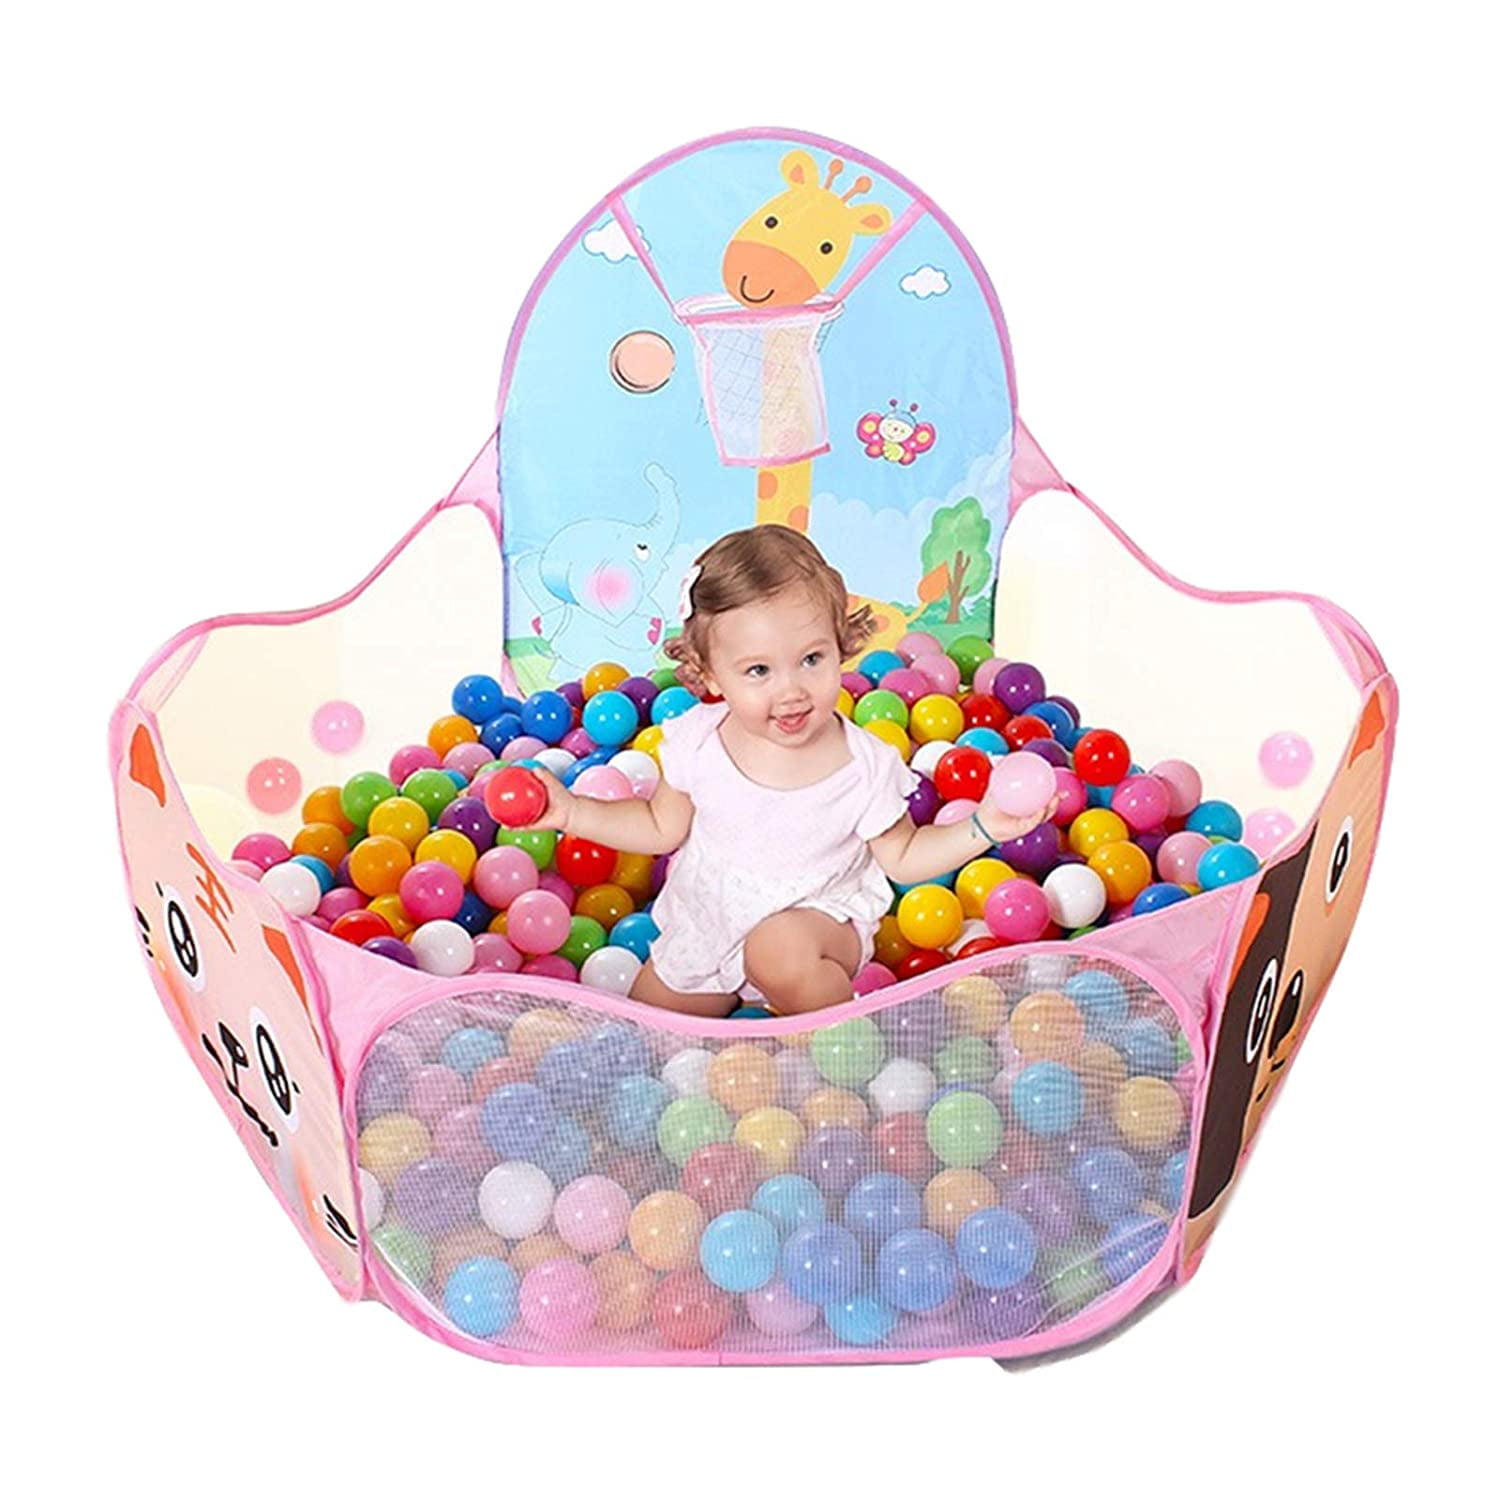 Foldable Play Tent House Baby Kids Ocean Ball Pit Pool Indoor Outdoor Playground 